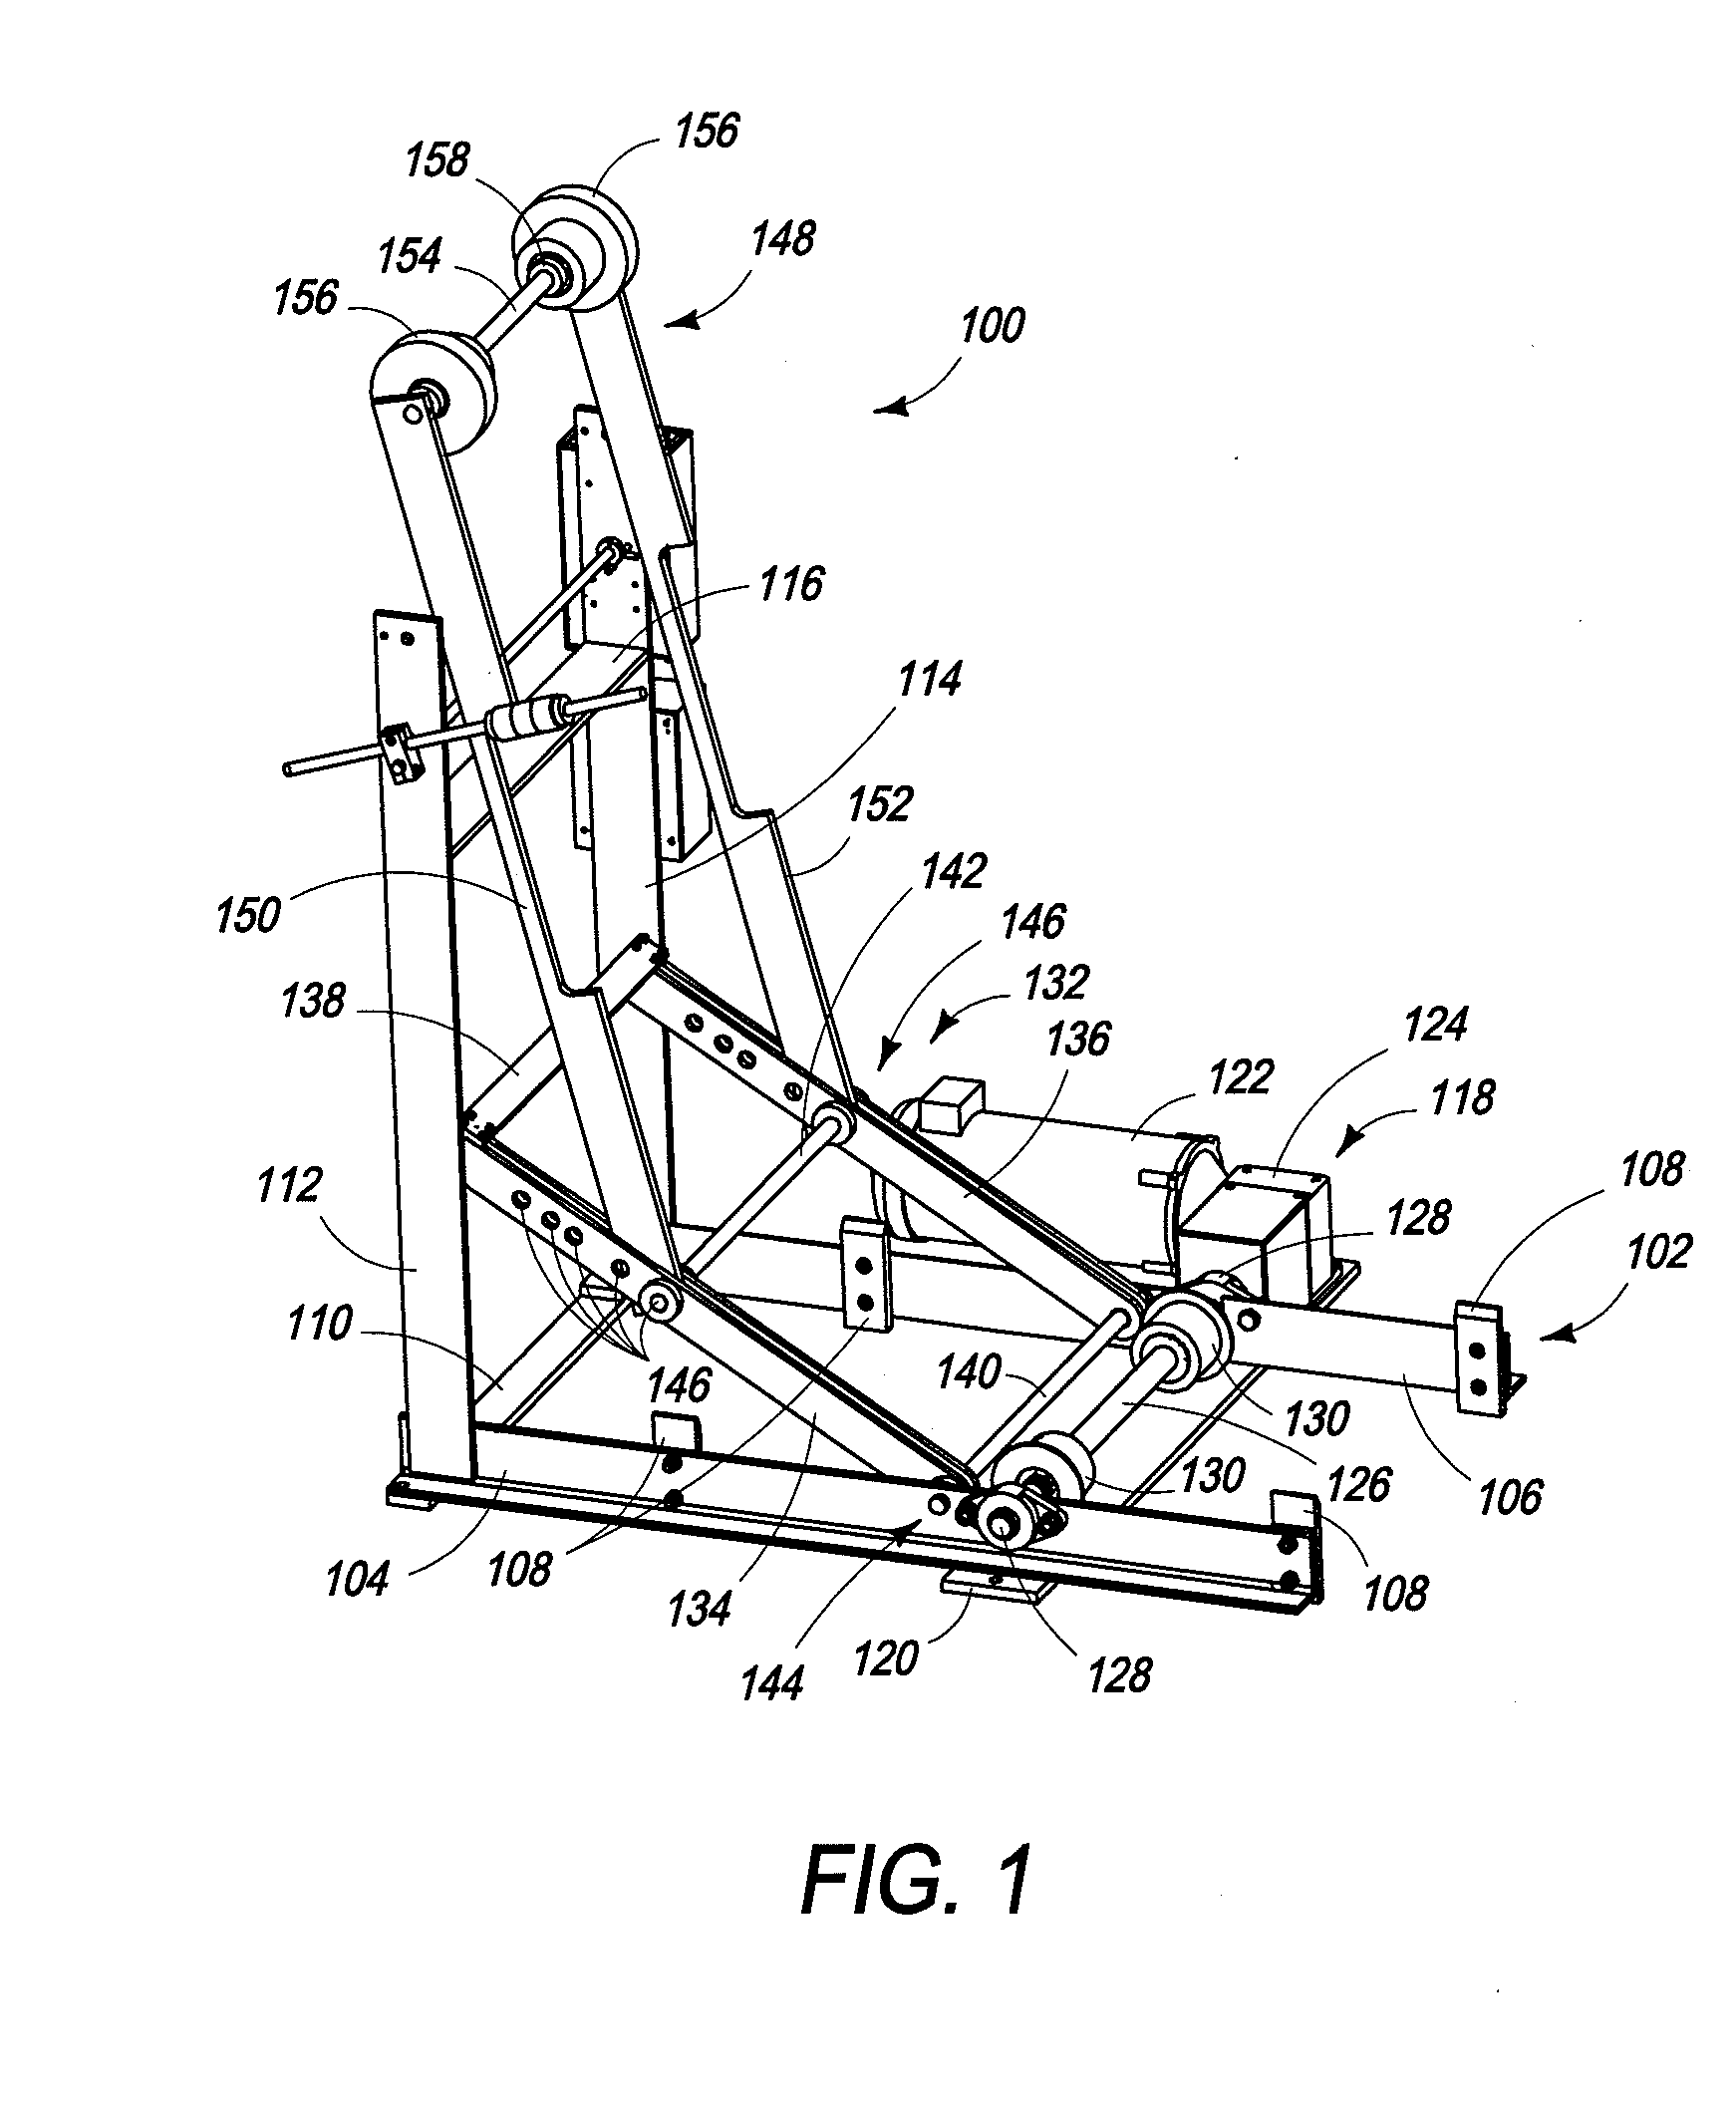 Foot Operated Lever-Lift Vertical Reel Unroller Assembly